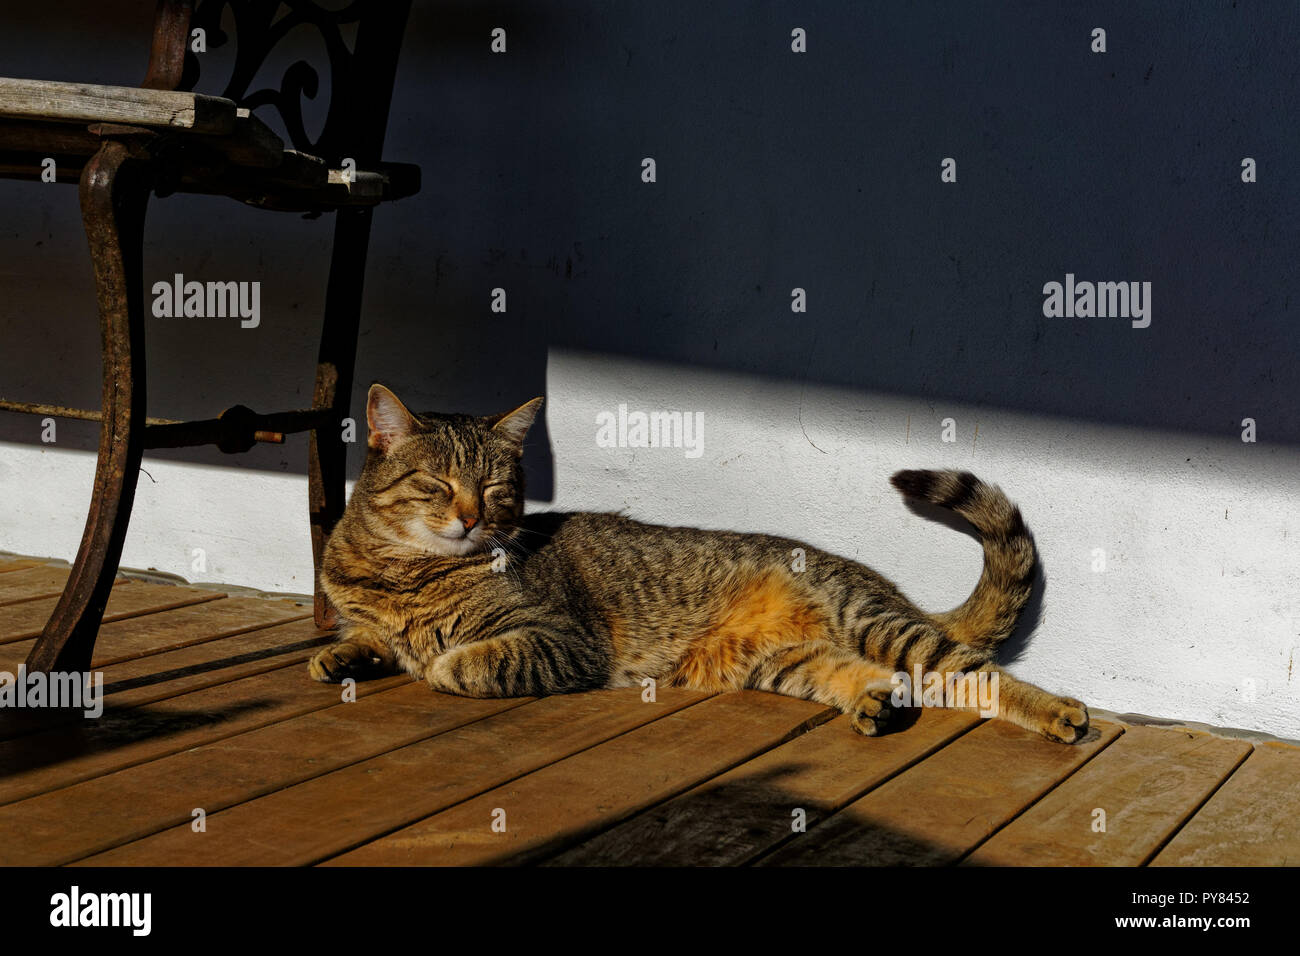 Let sleeping cats lie. A cat napping in the sun. Stock Photo